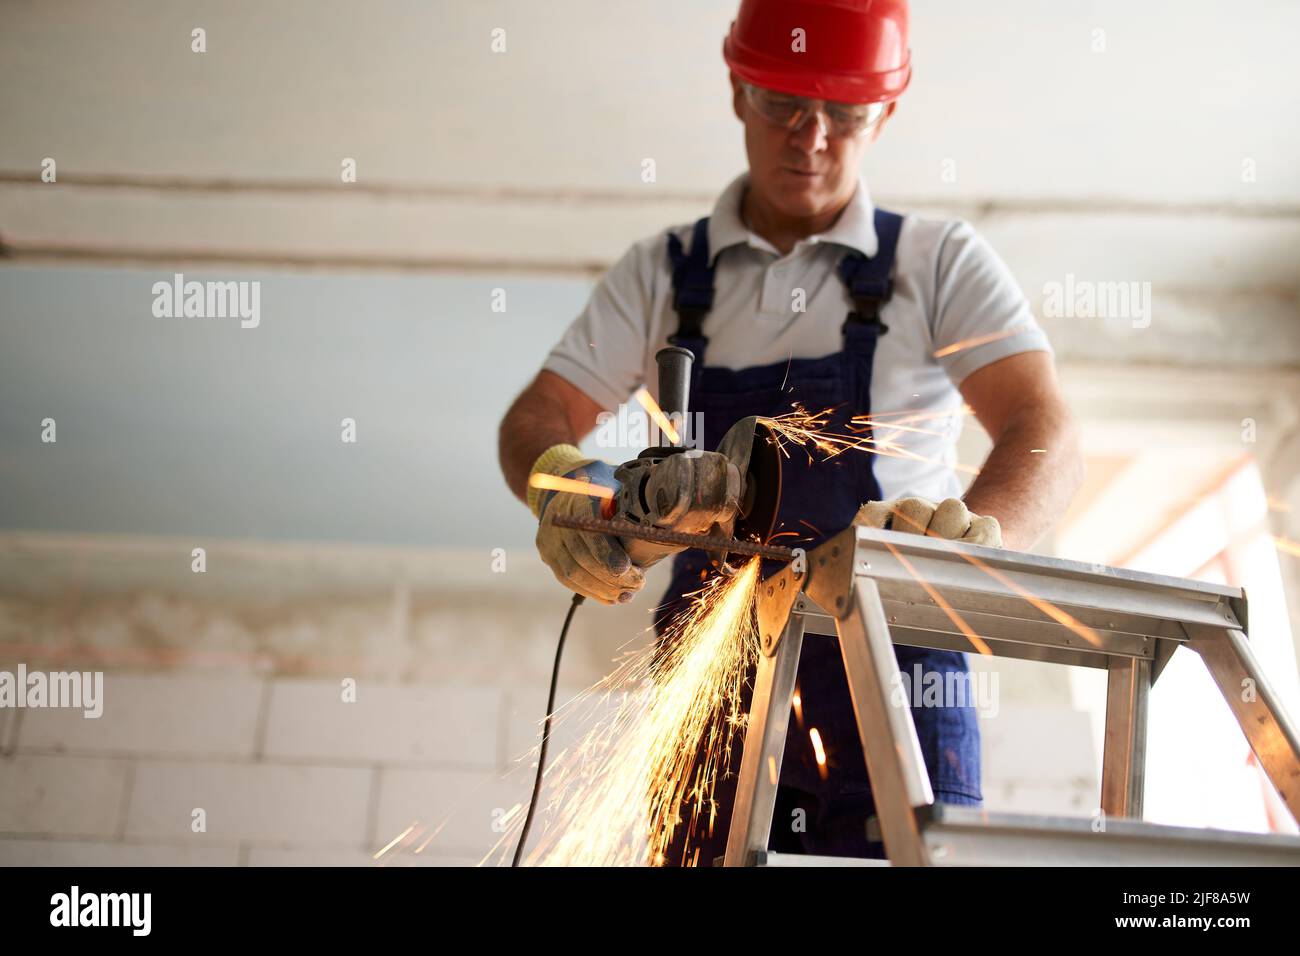 Professional construction worker hands in work gloves using angle grinder to cut metal rod at building site. Close up shot of contractor cutting iron Stock Photo